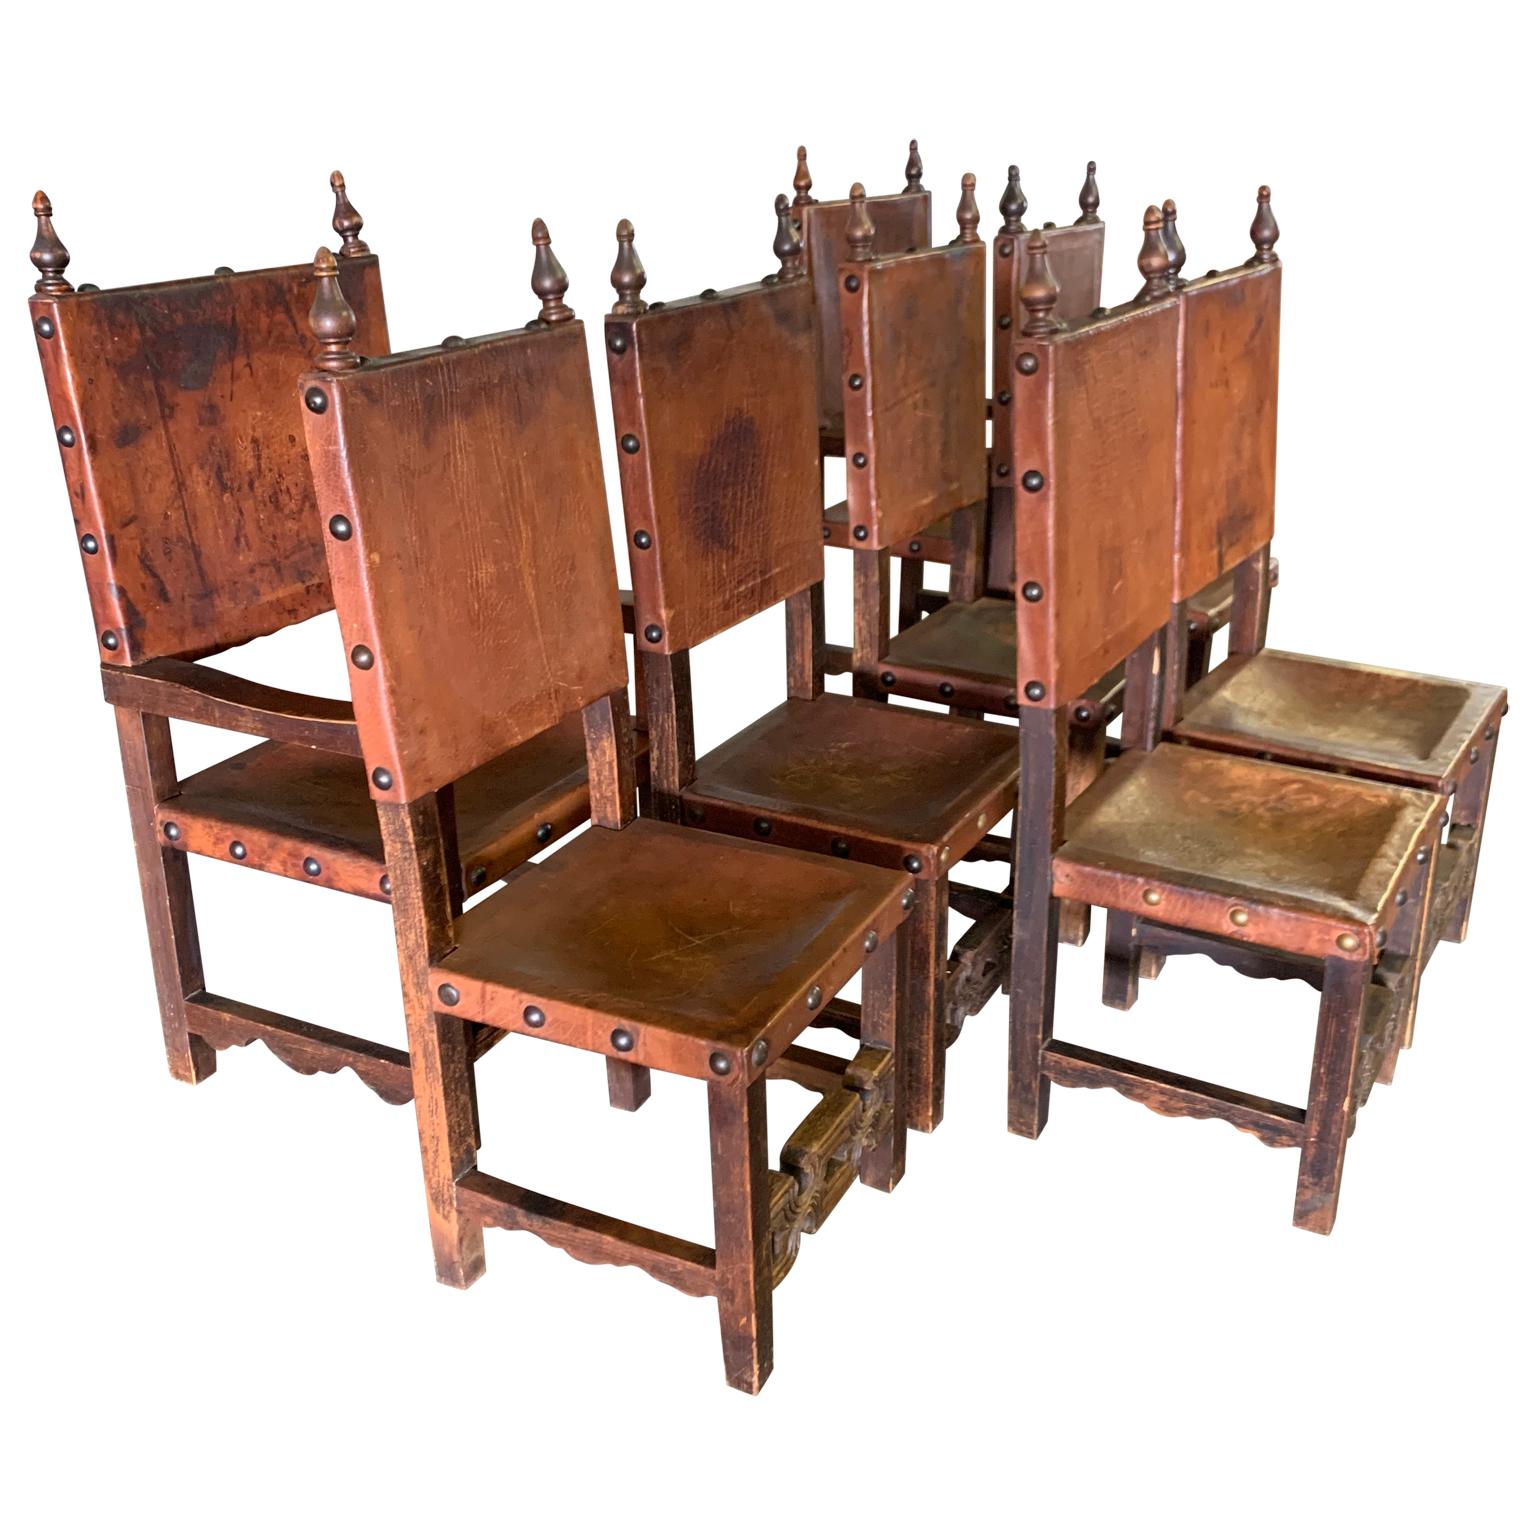 Set of 8 Baroque Style Leather Dining Room Chairs (Barock)